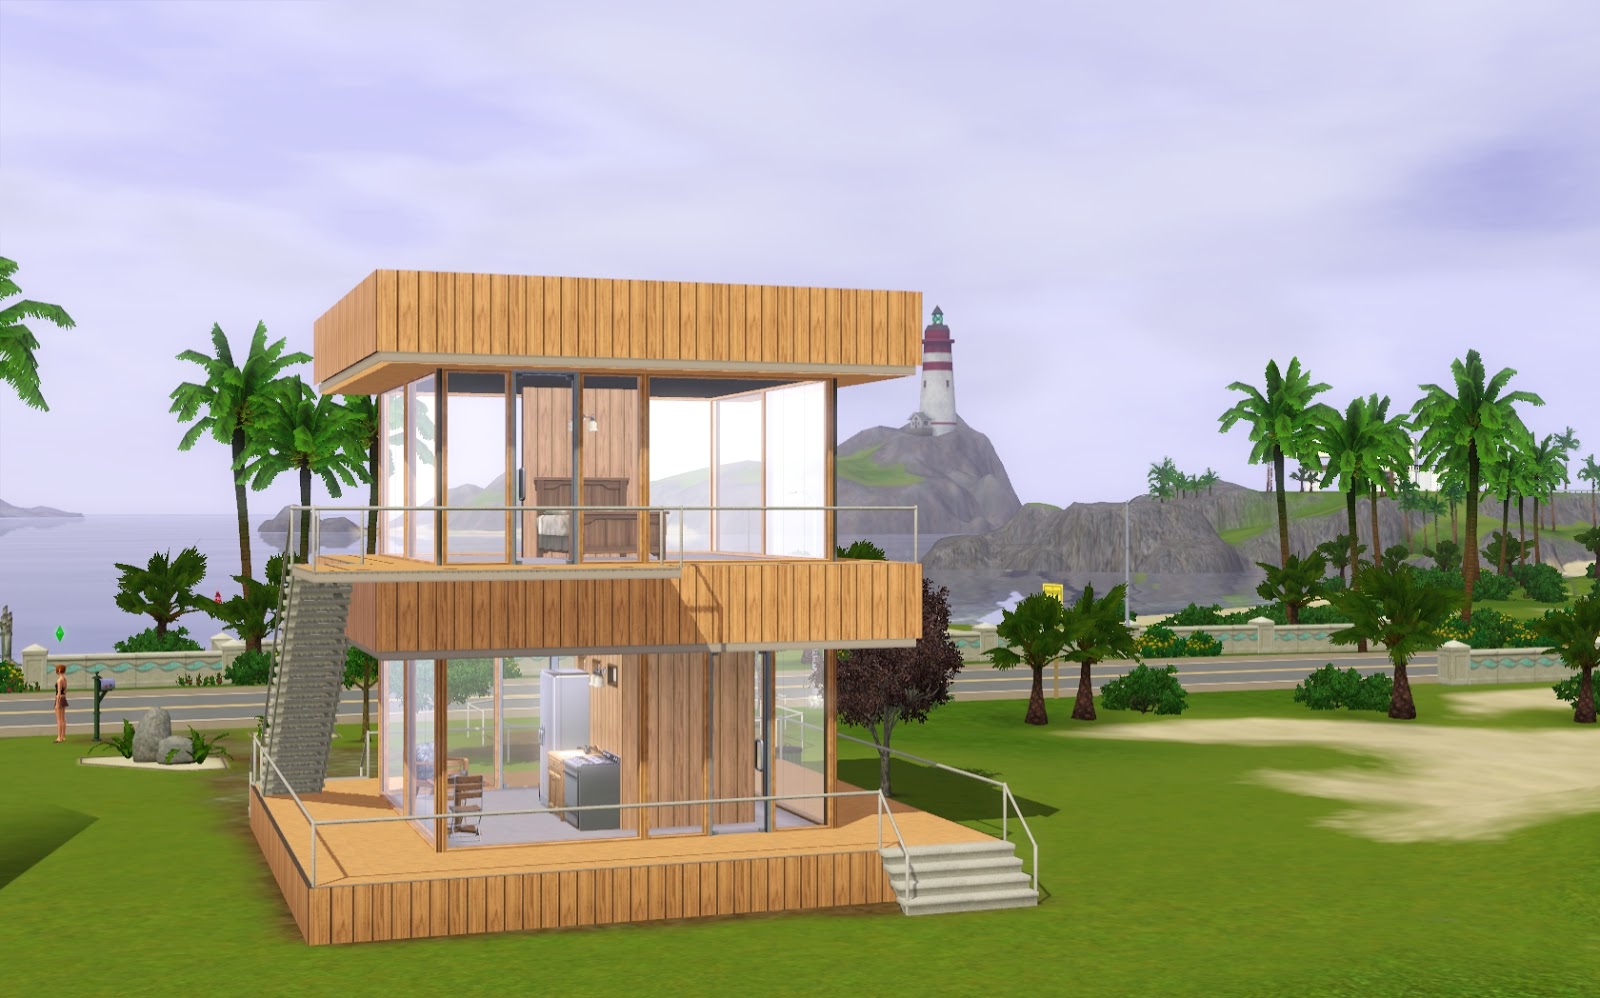 Summer's Little Sims 3 Garden: The Sims 3: Cheat Codes and How to Use Them